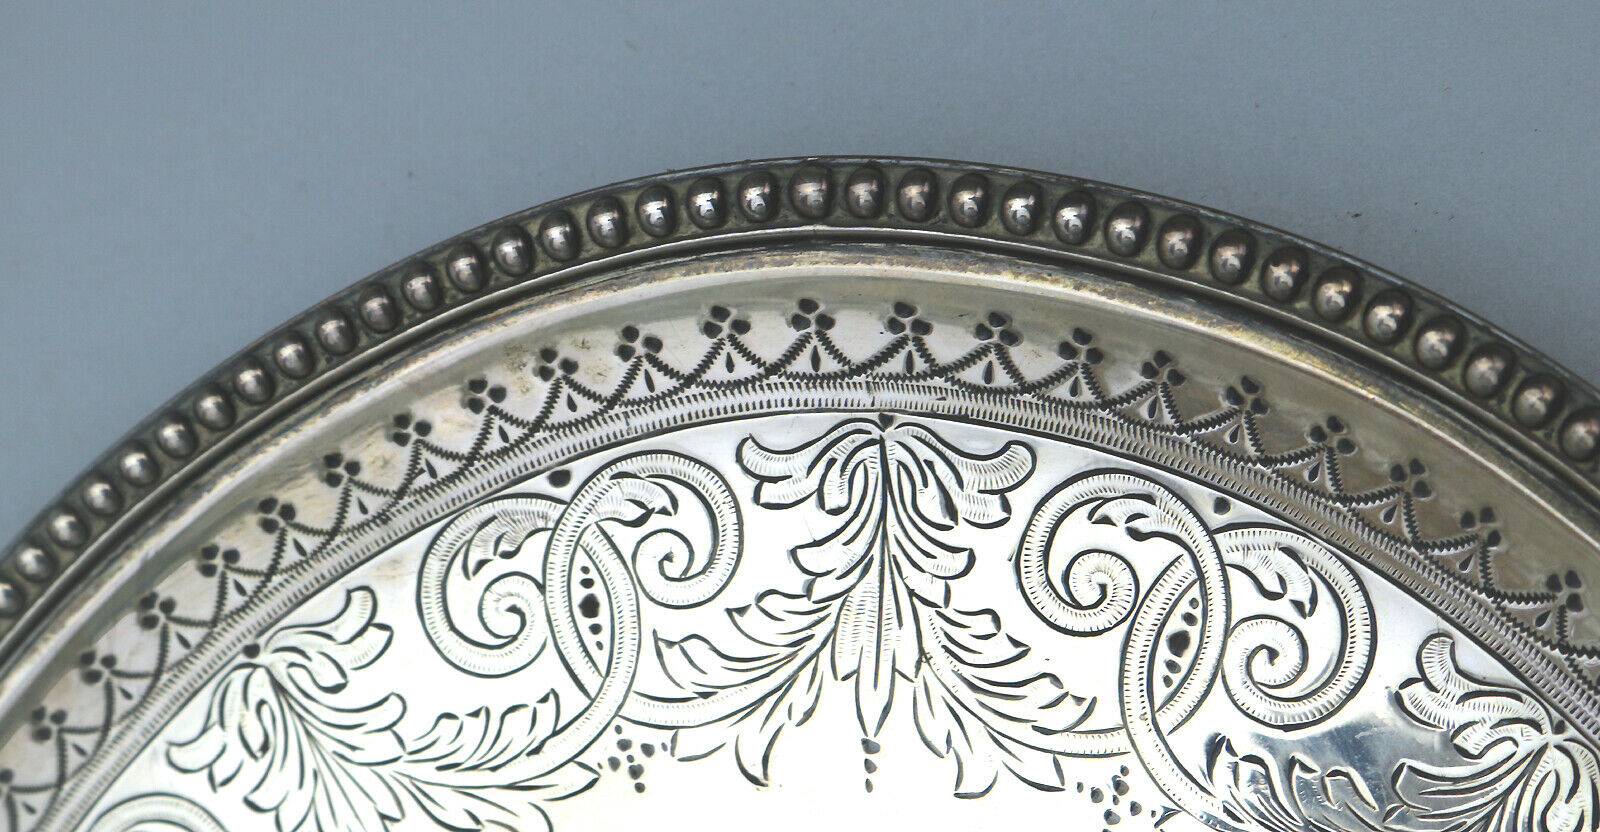 A fine solid silver Ink stand with engraved tray and lid by Elkington C.1877 - Image 6 of 12